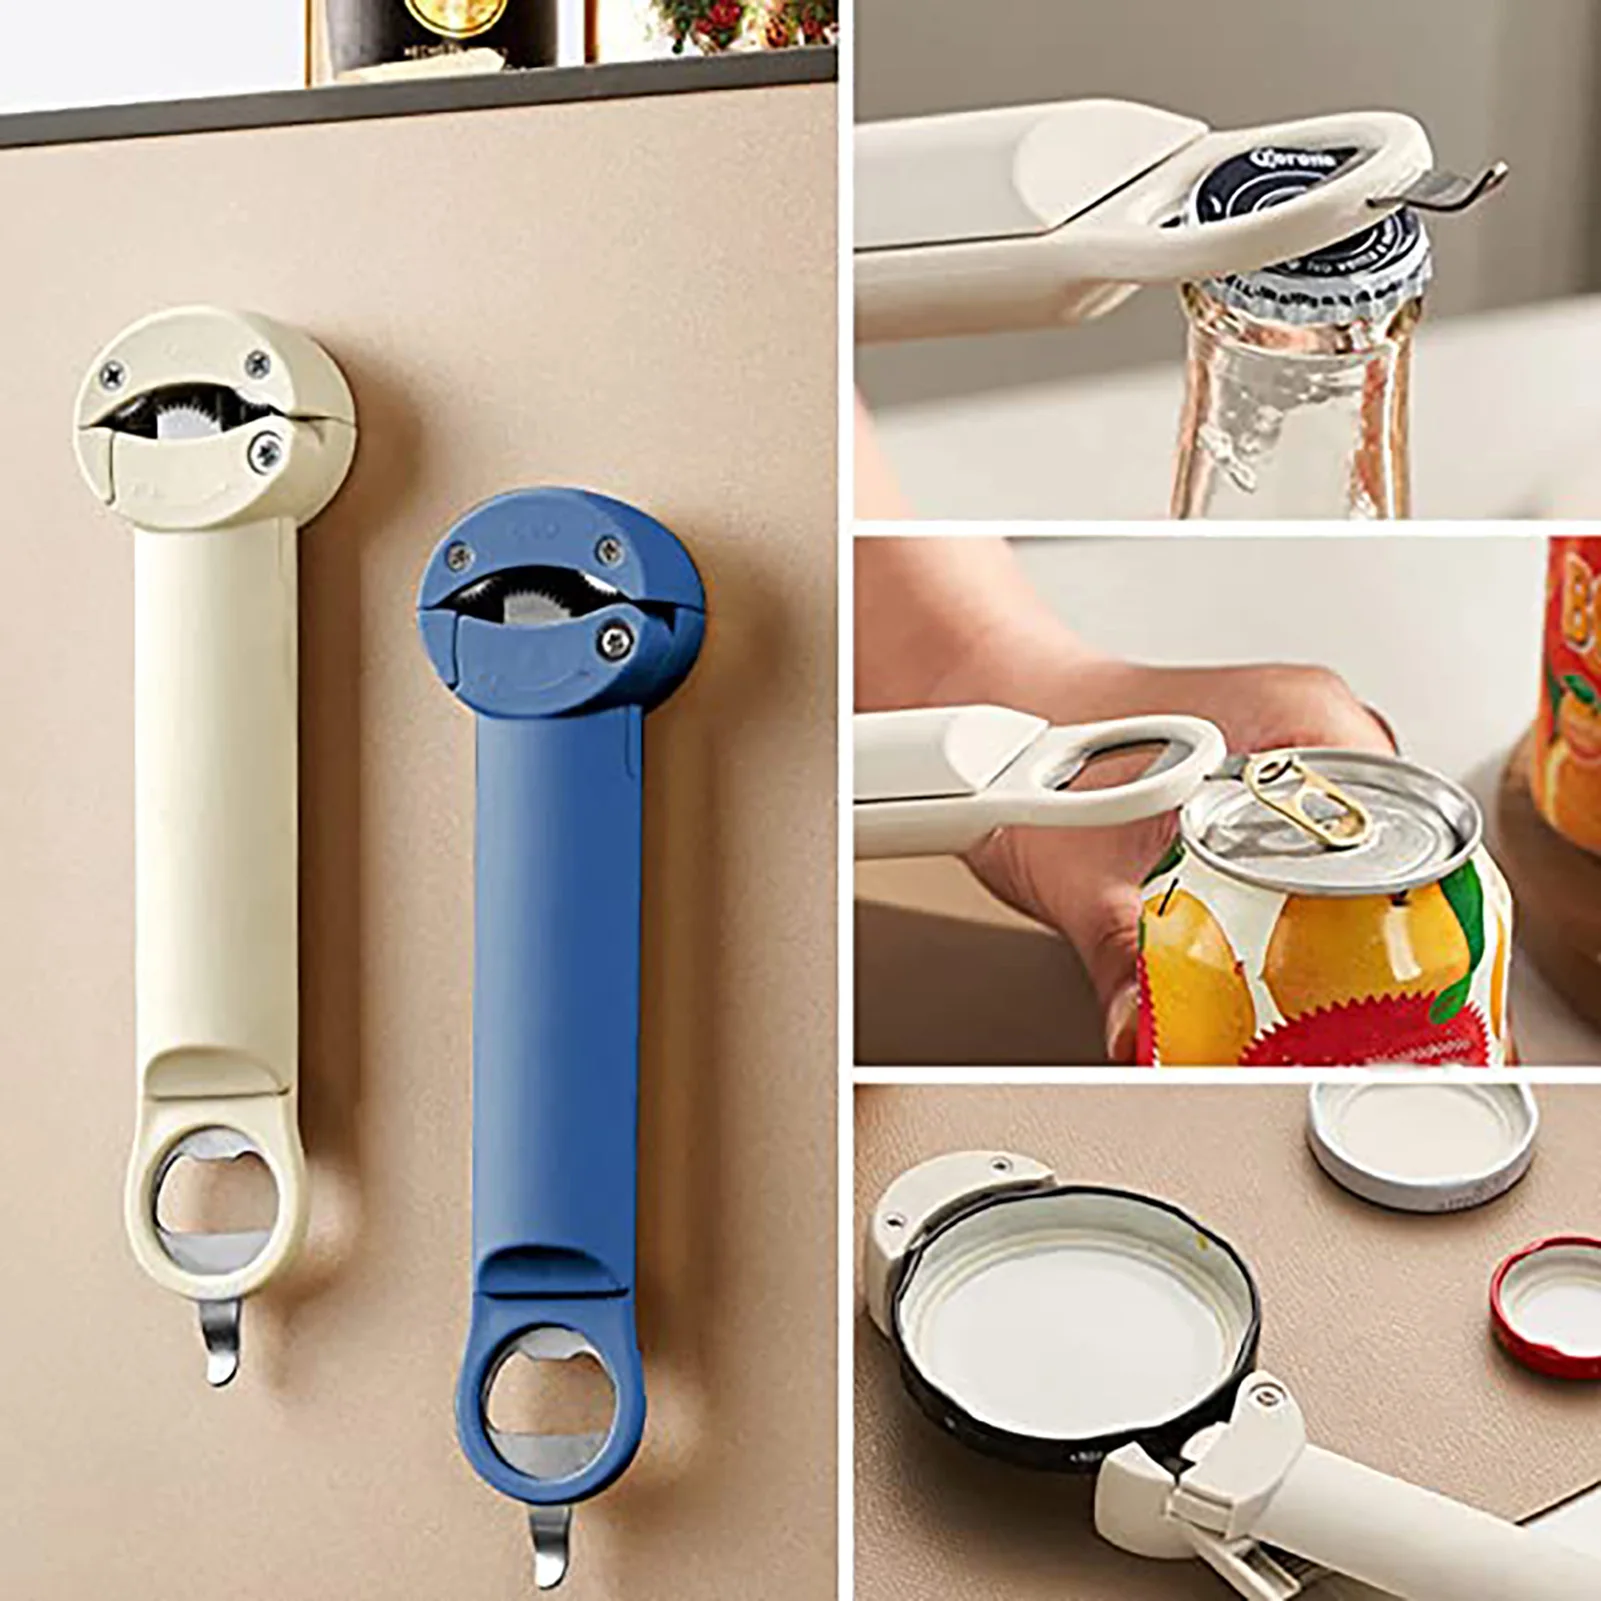 Magnetic Multifunction Jar Opener Adjustable Can Gripper Tight Lid Opener  Kitchen Home Gadgets Elderly with Arthritis and Hand